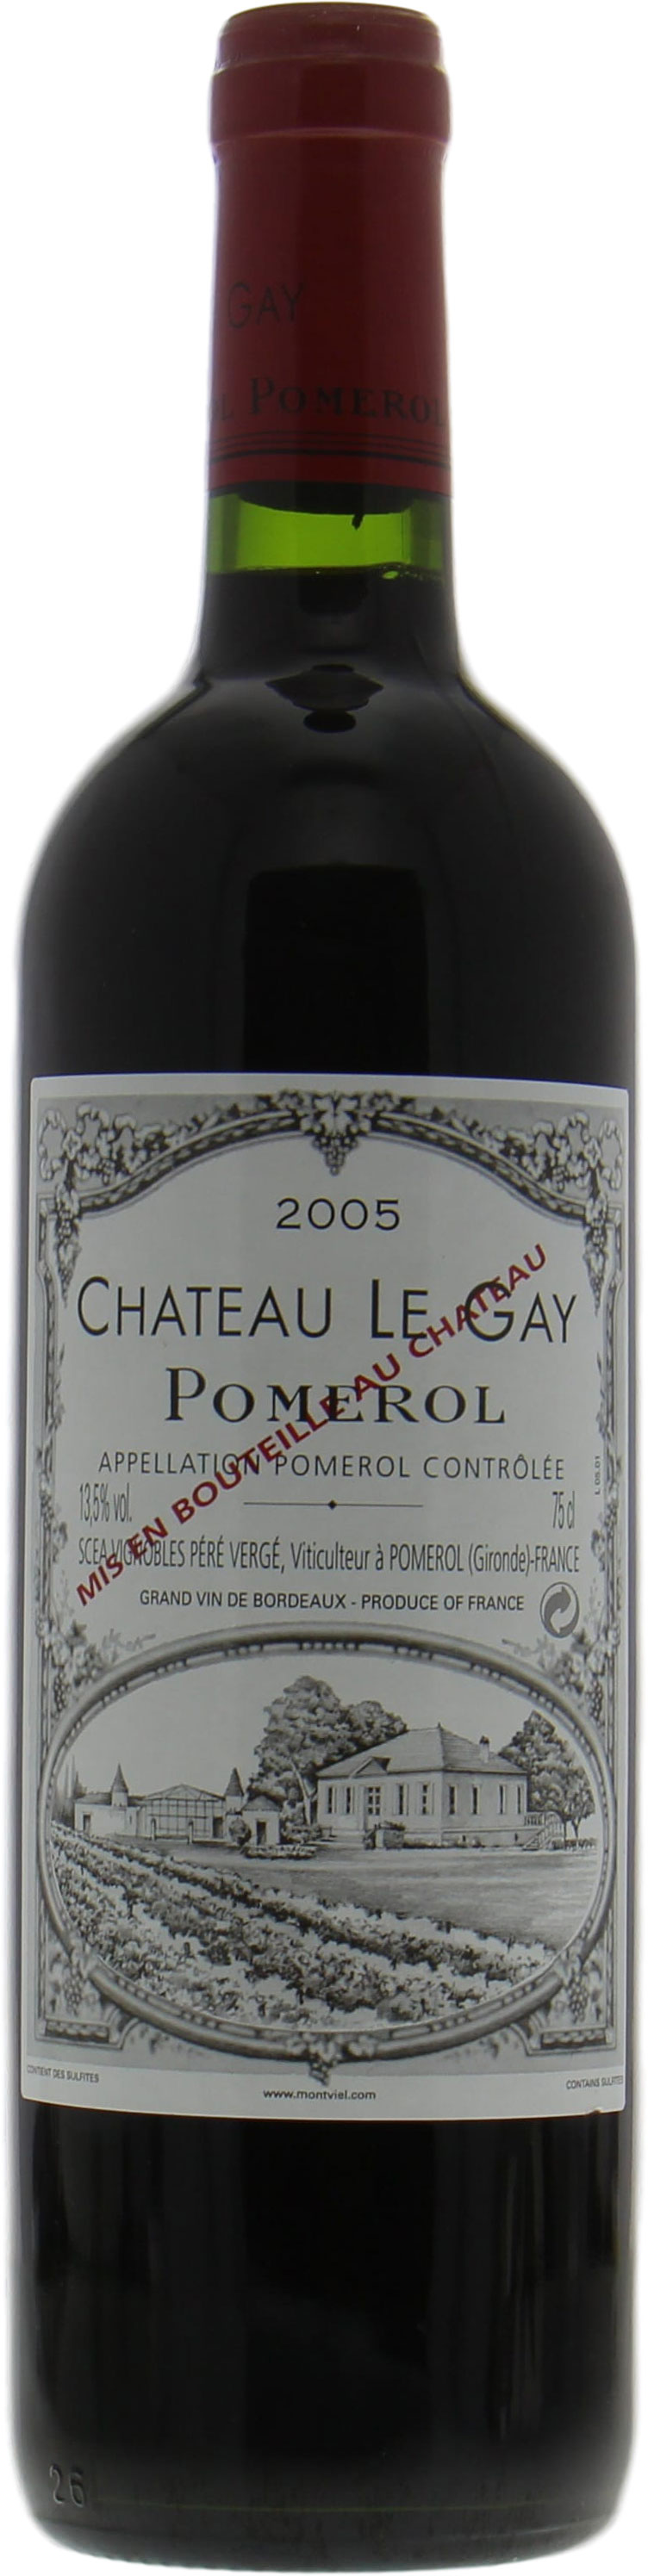 Chateau Le Gay - Chateau Le Gay 2005 From Original Wooden Case